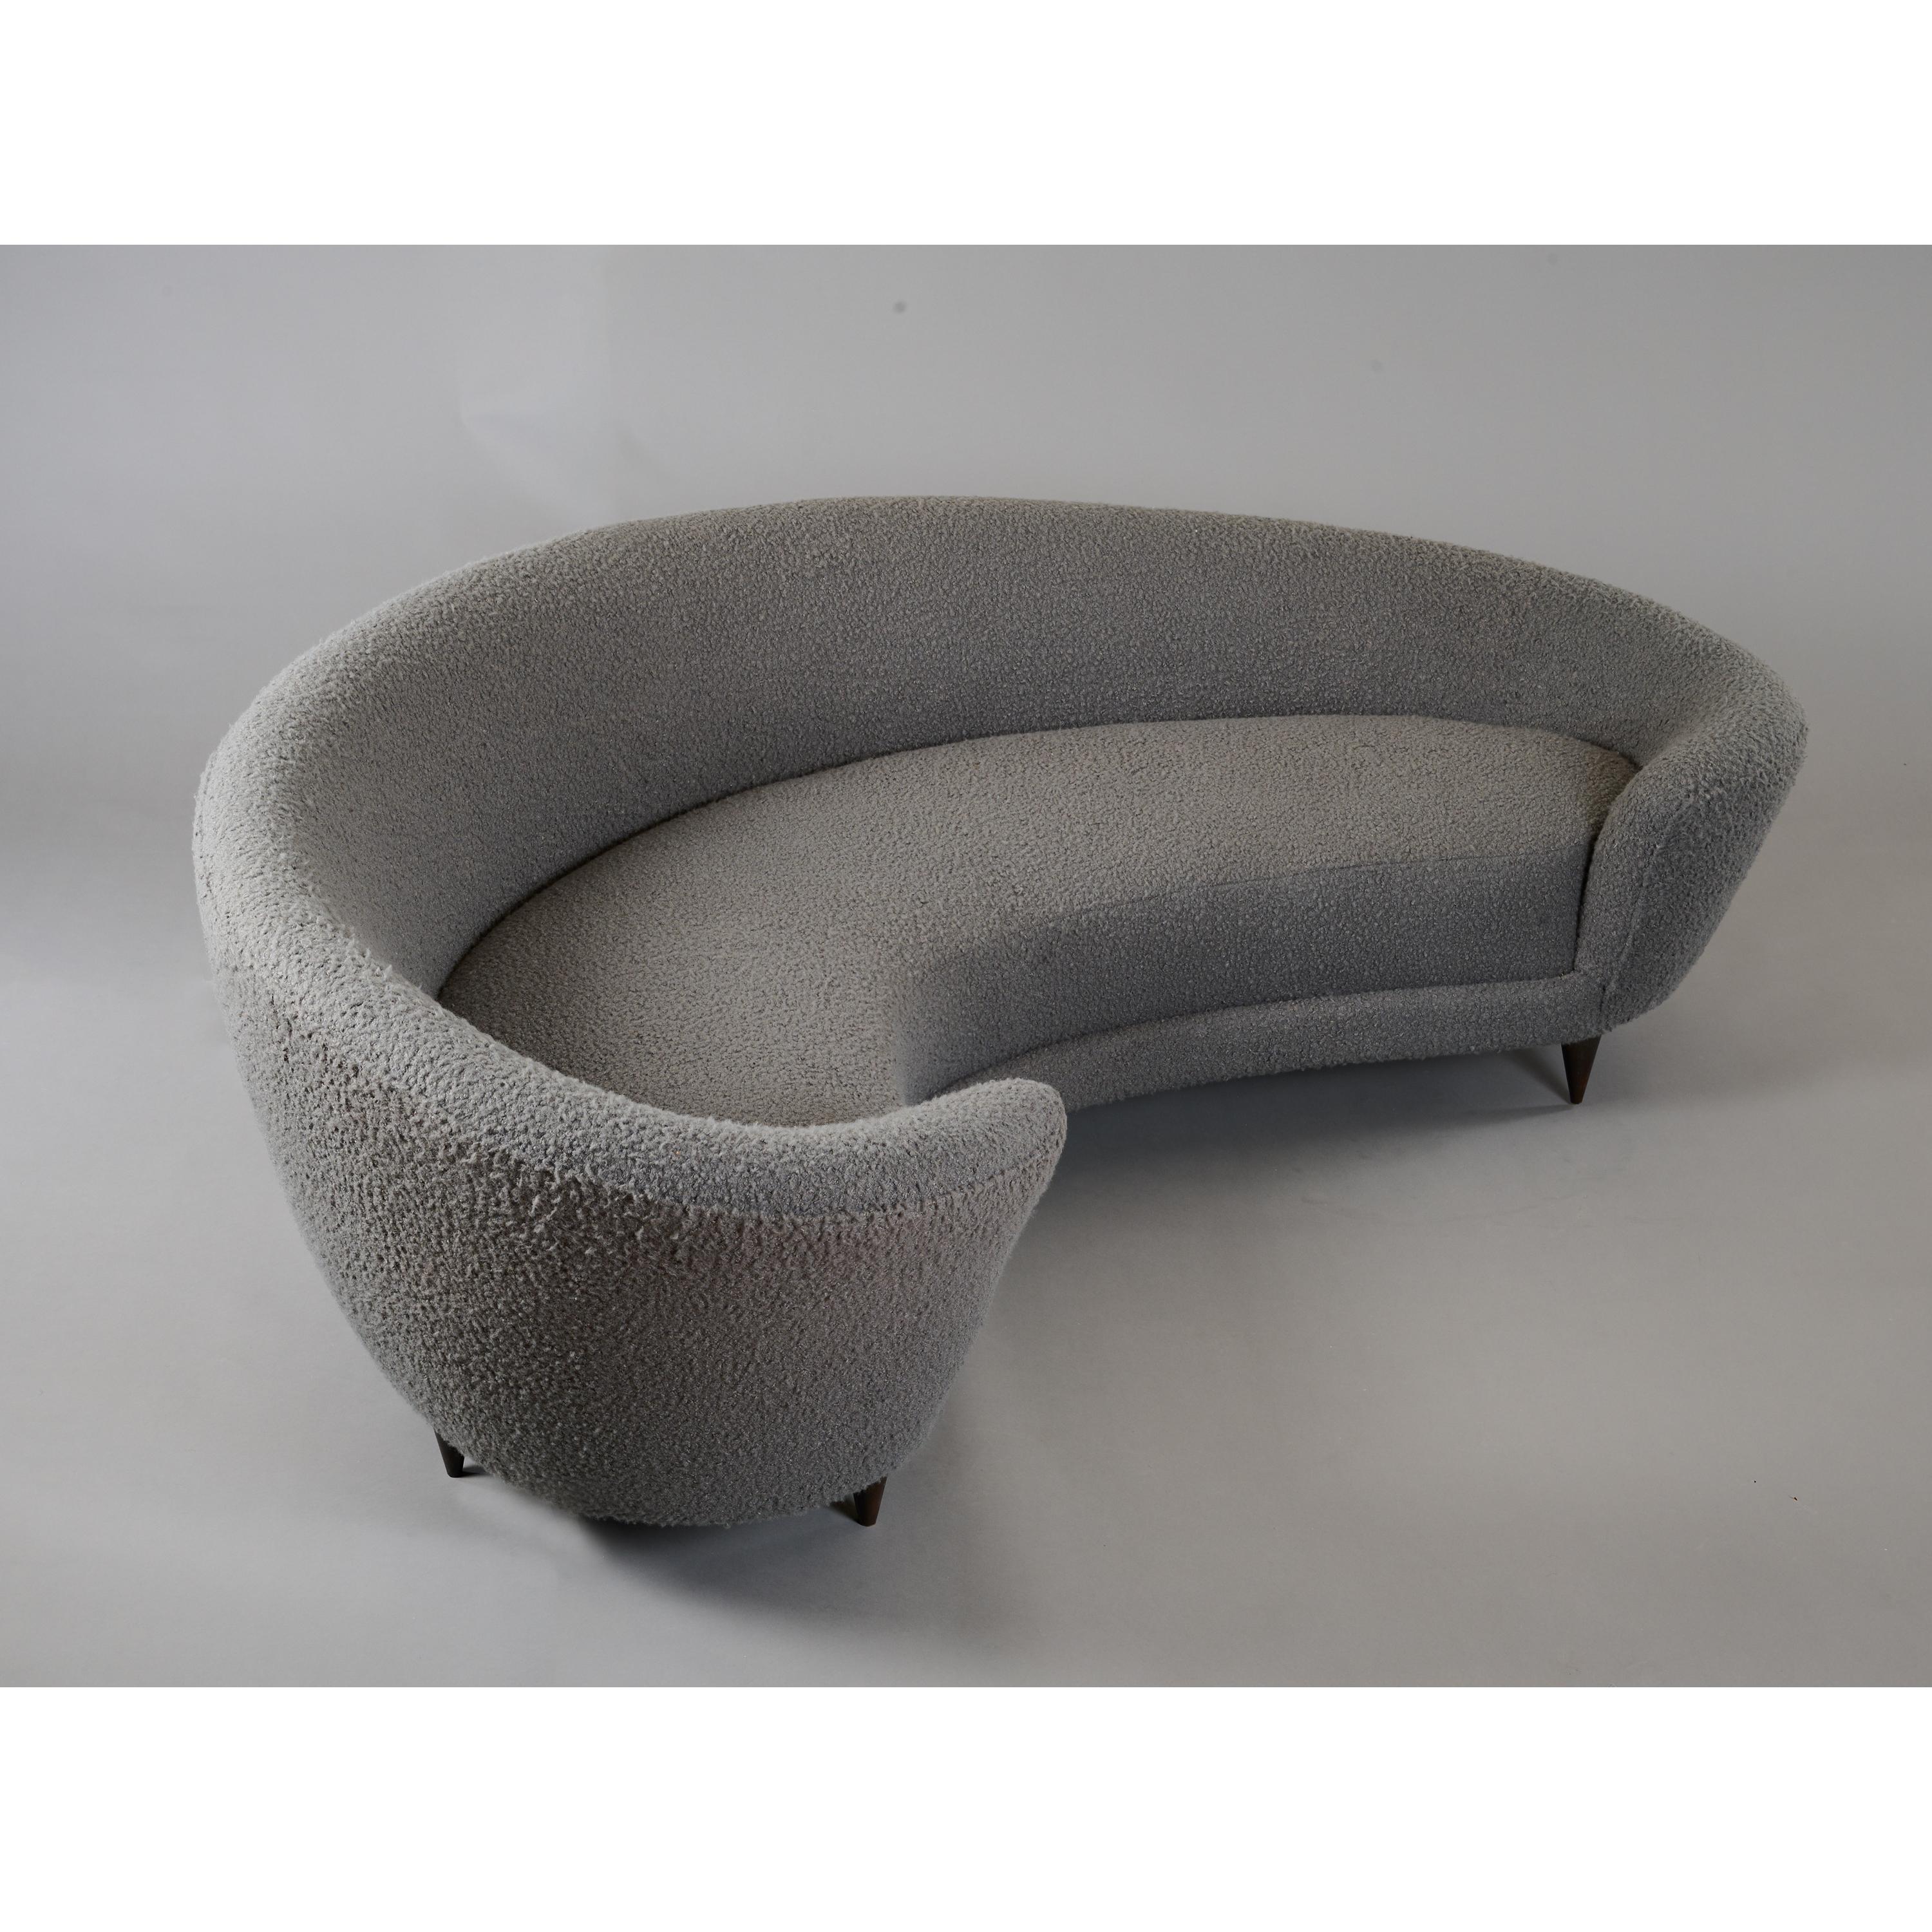 Federico Munari Large Curved Sofa in Dove Grey Boucle, Italy 1960's For Sale 8